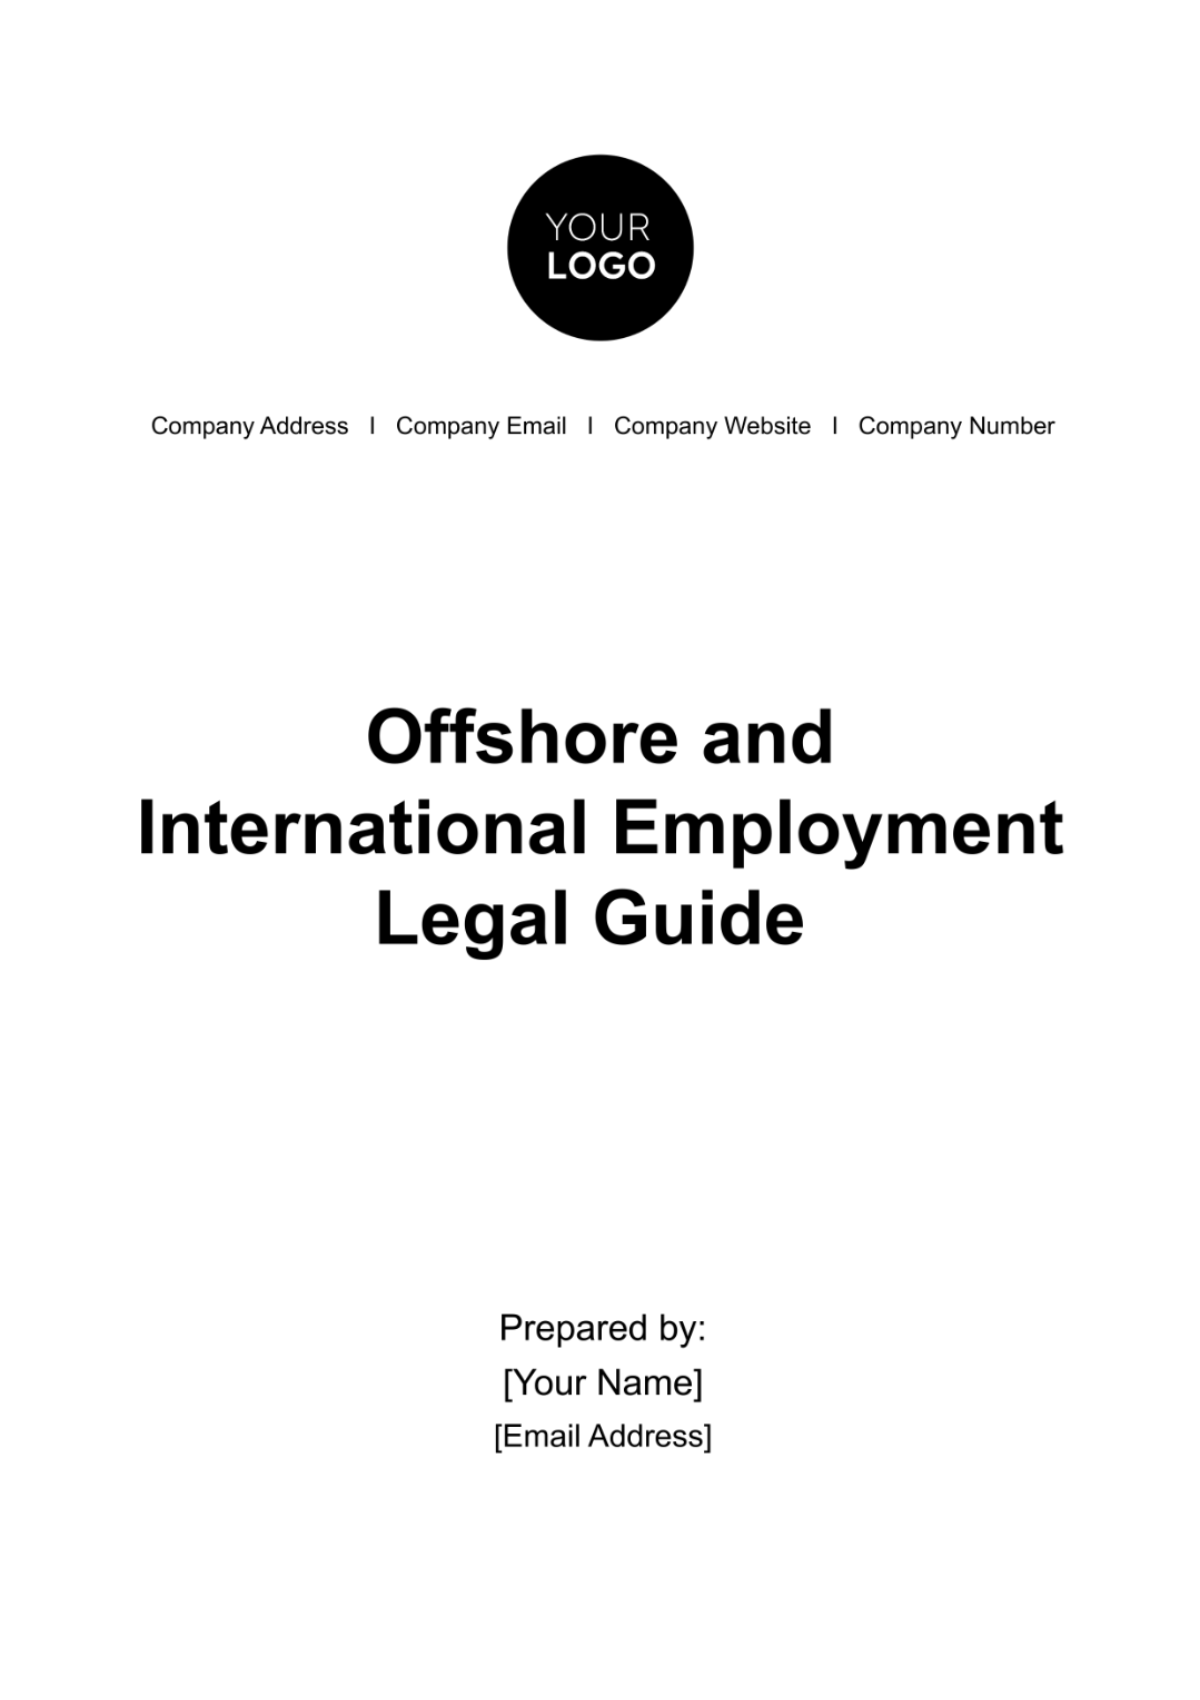 Free Offshore and International Employment Legal Guide HR Template